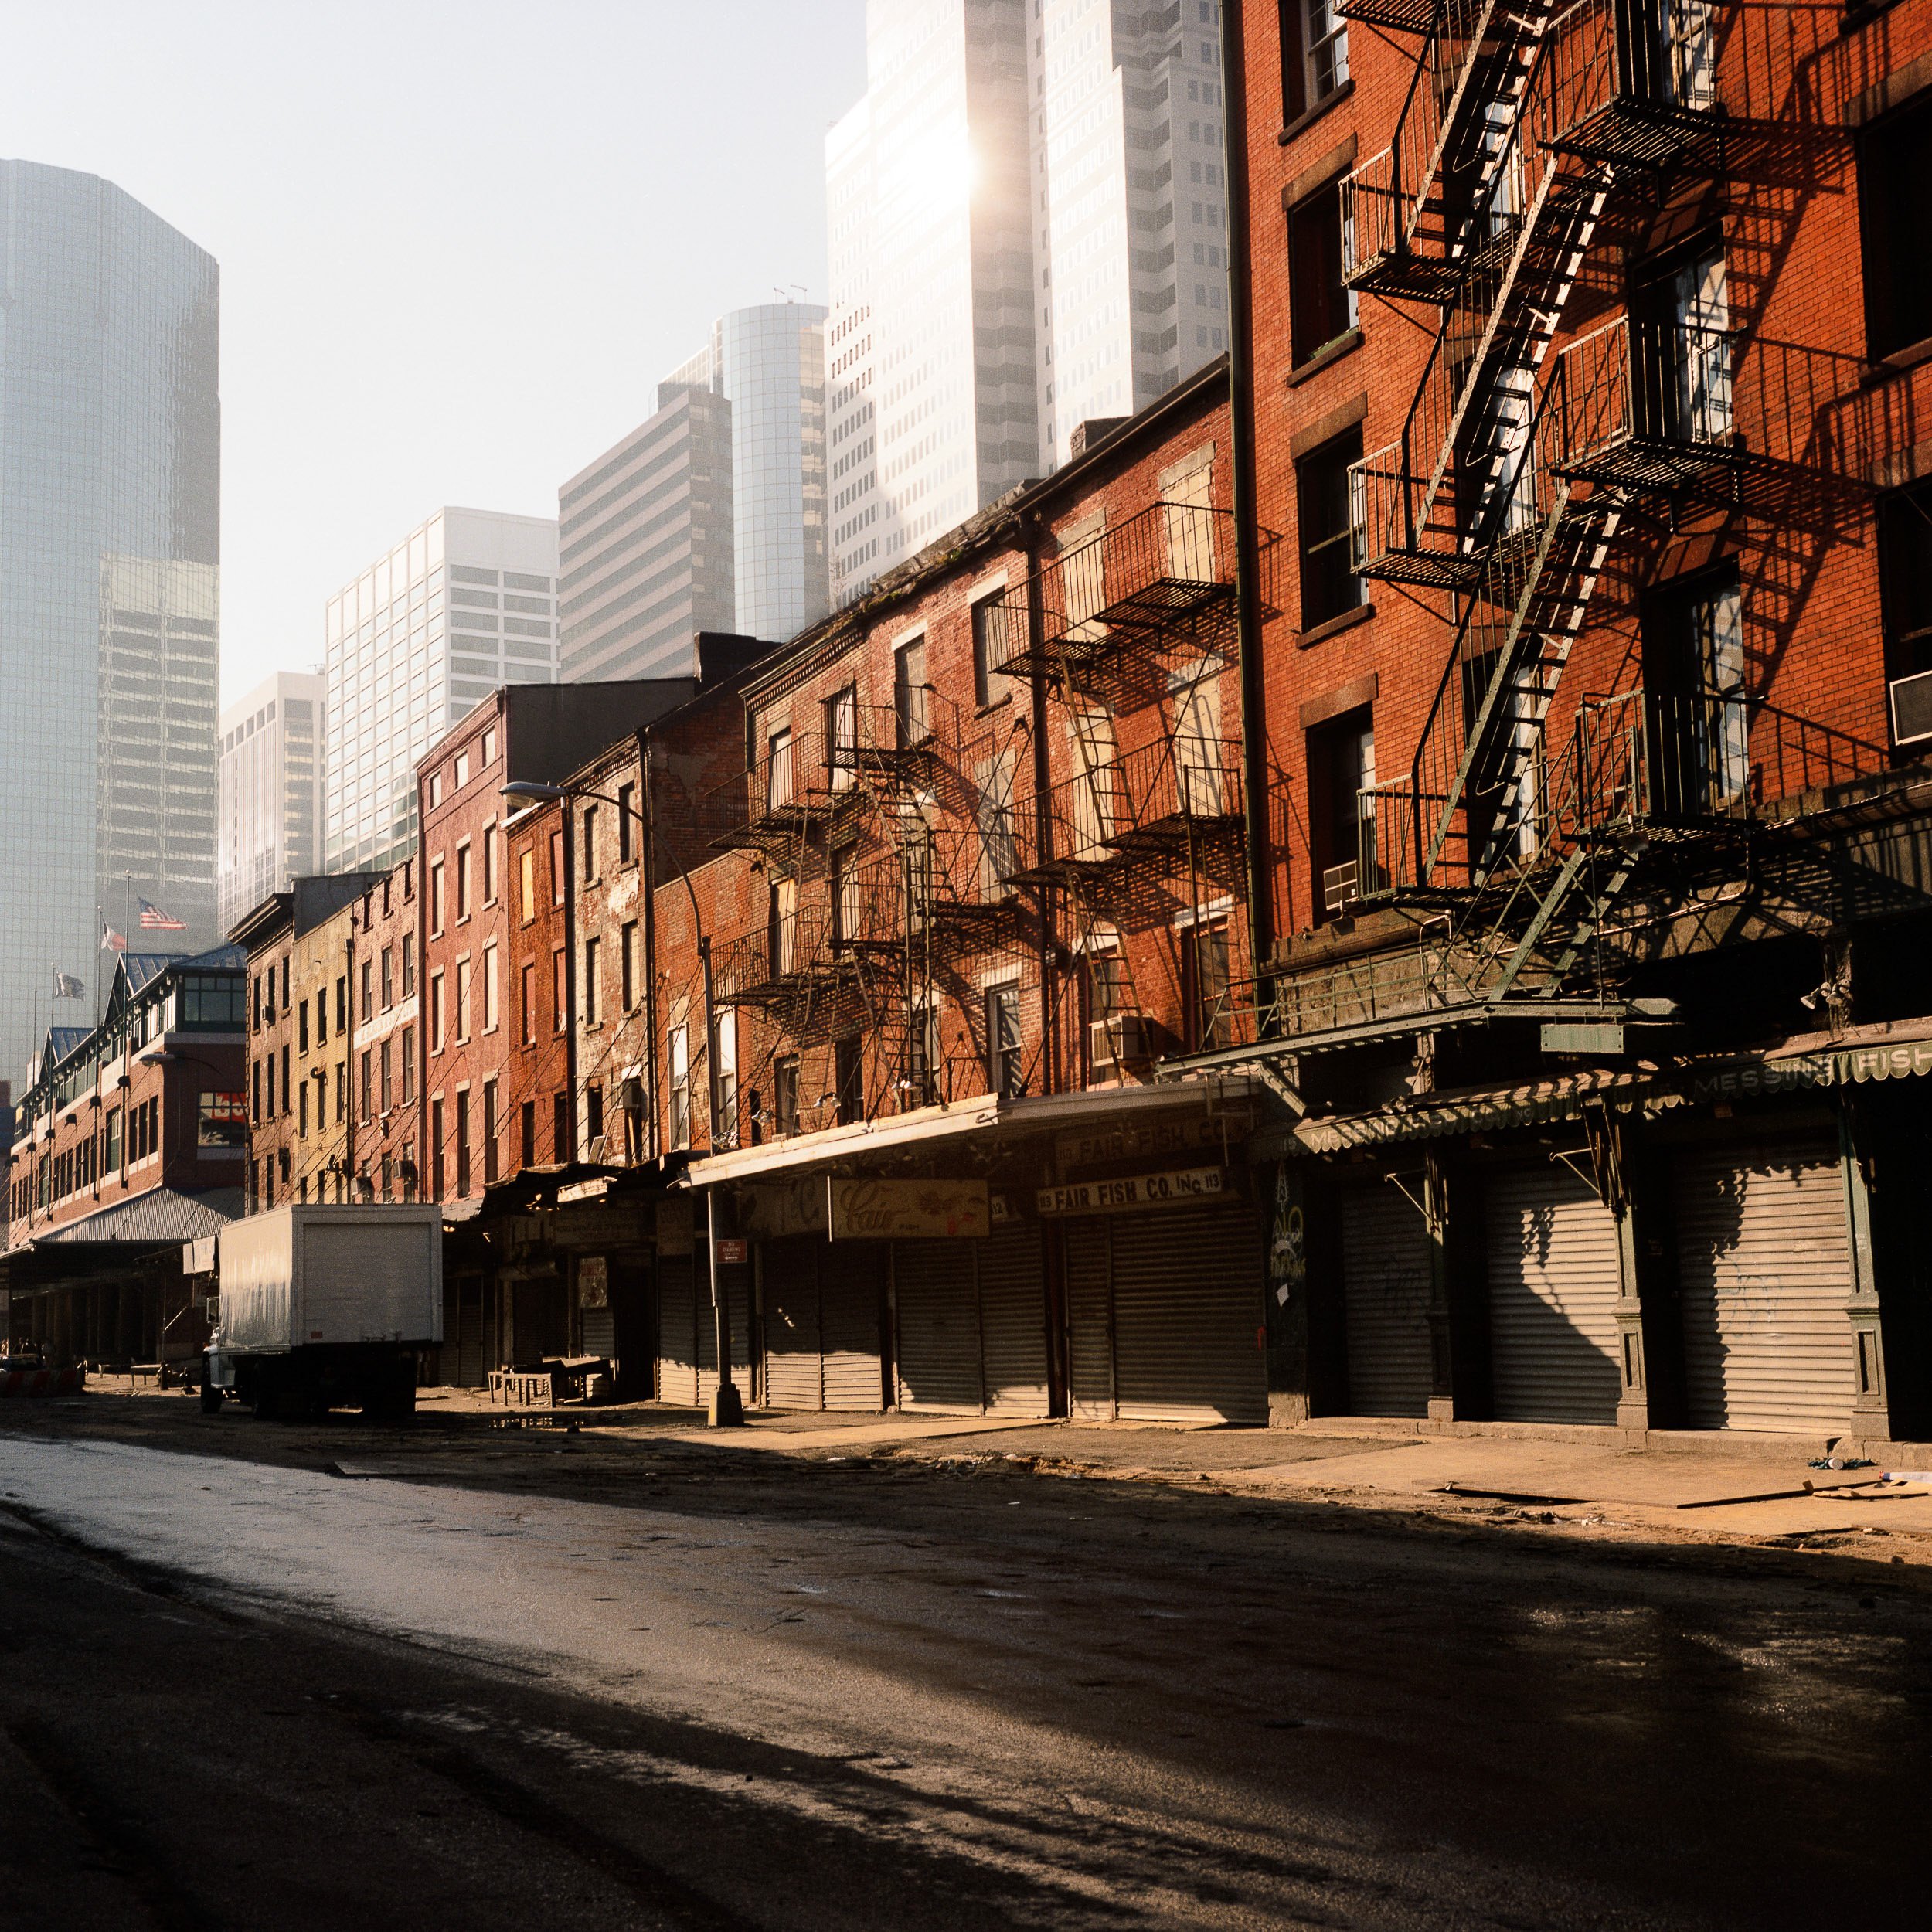   South Street with High-Rises, 1984  